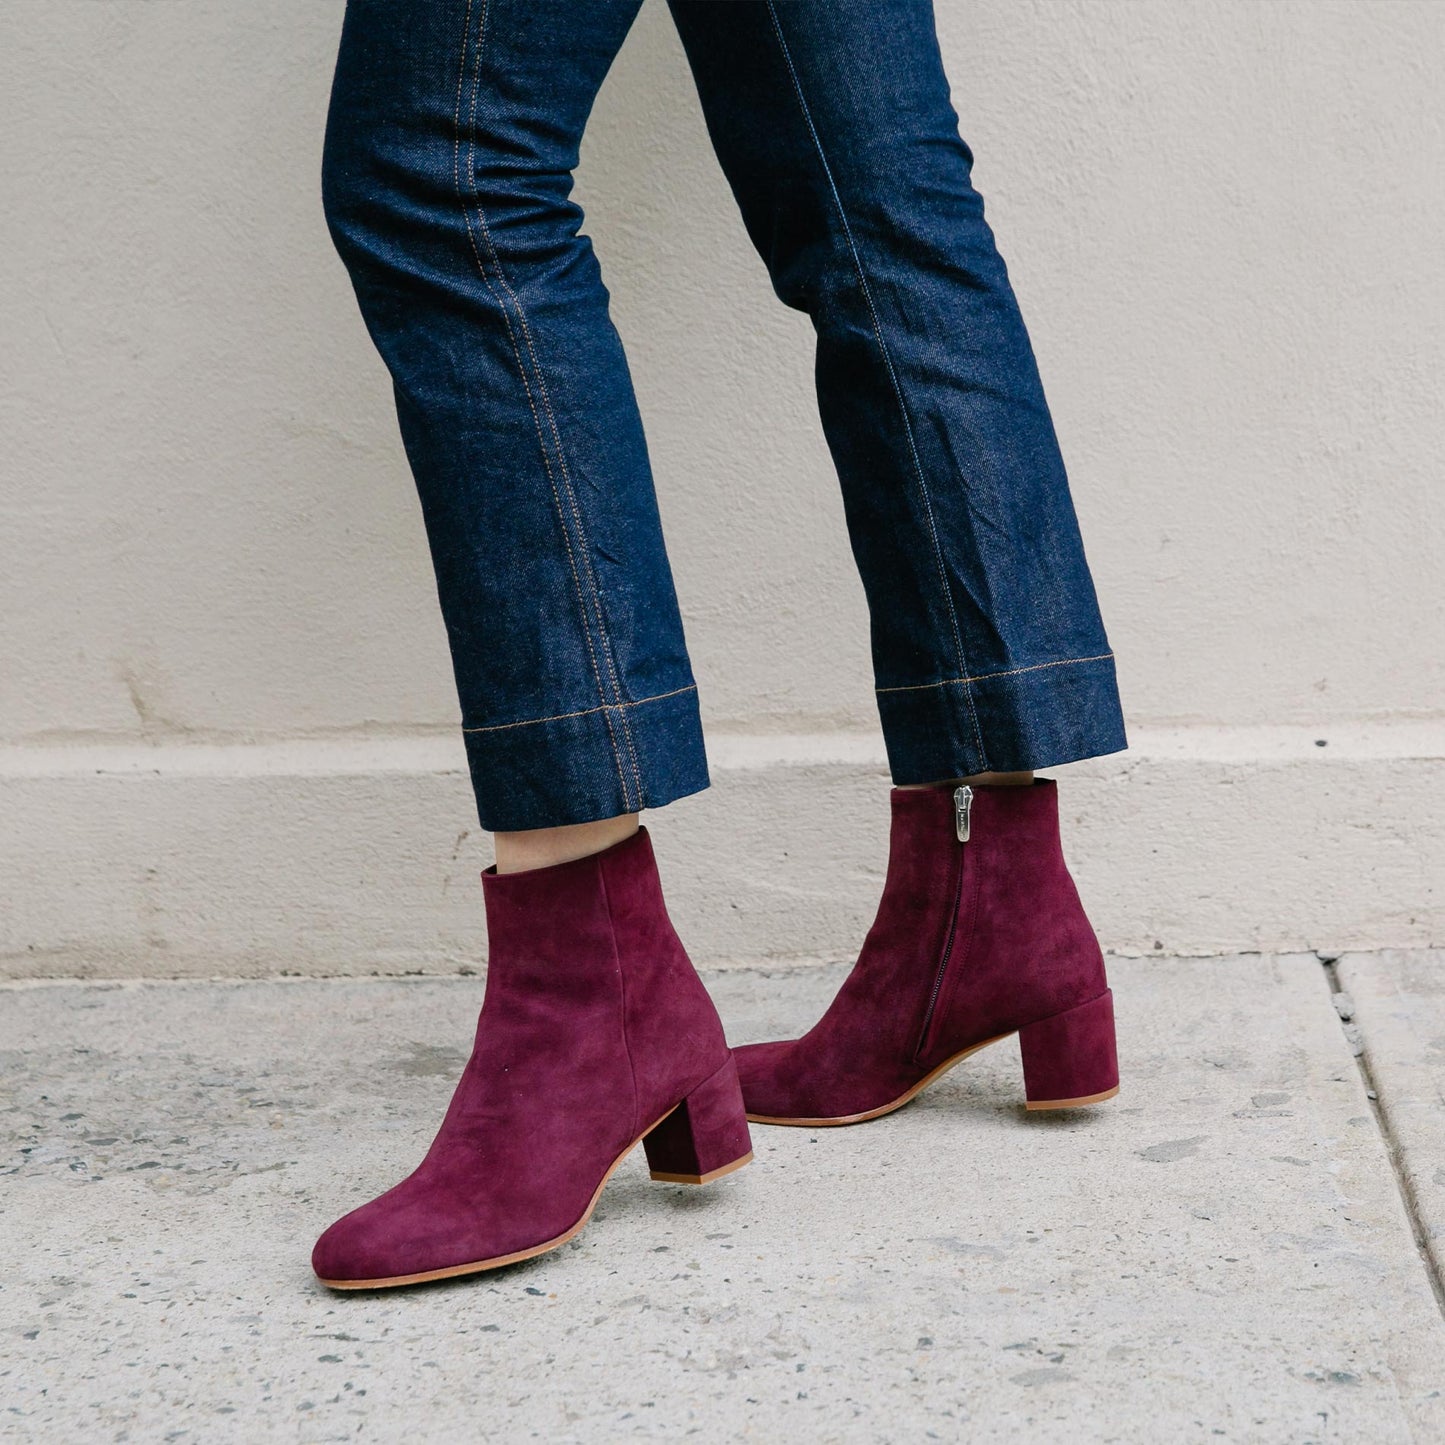 The Boot - Mulberry Suede